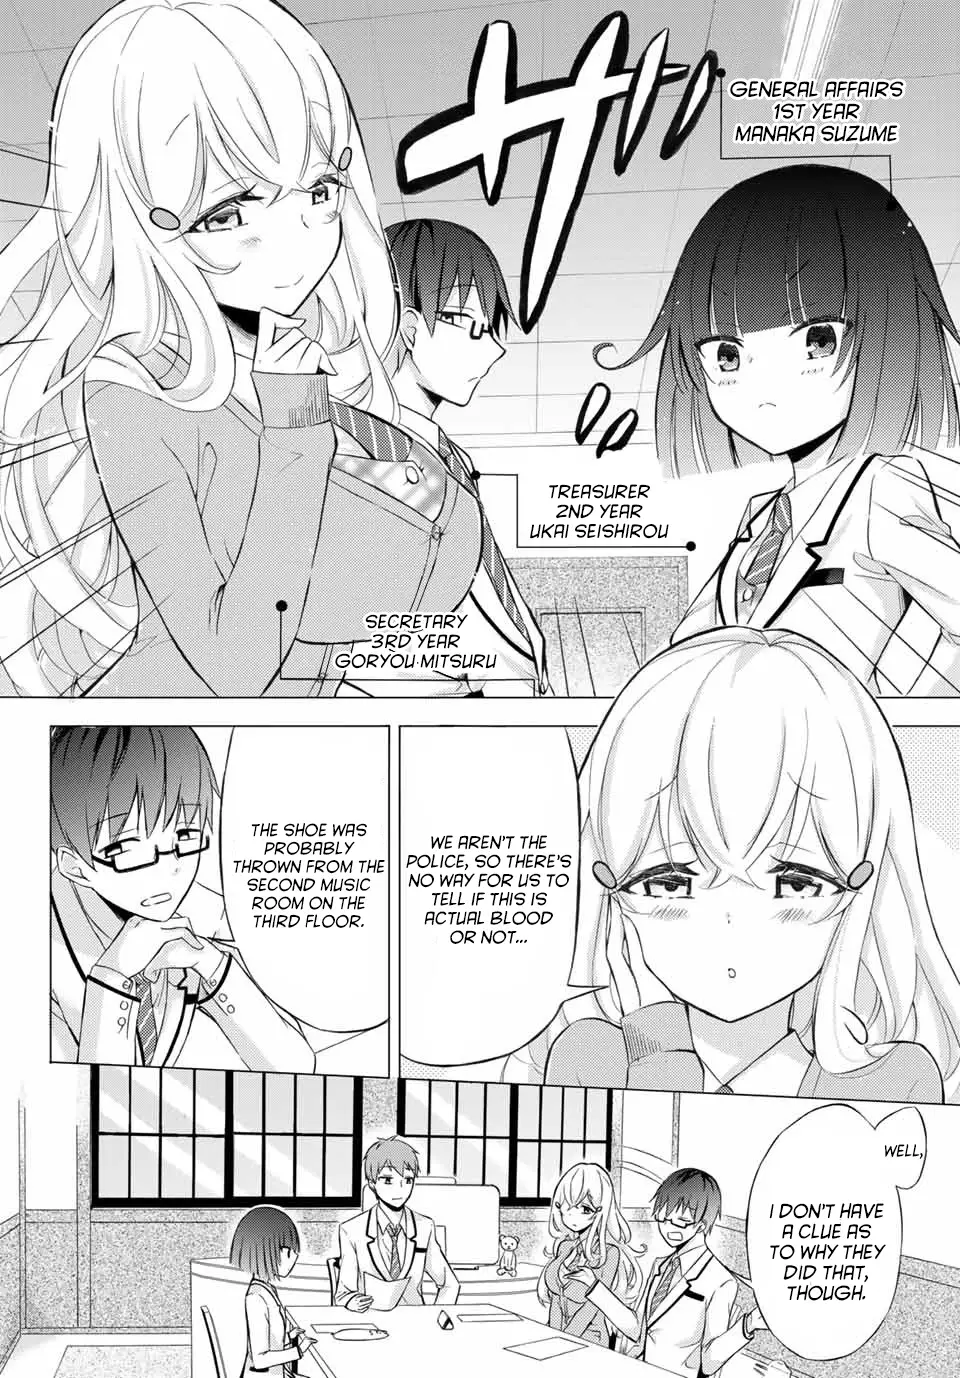 The Student Council President Solves Everything On The Bed - 1 page 10